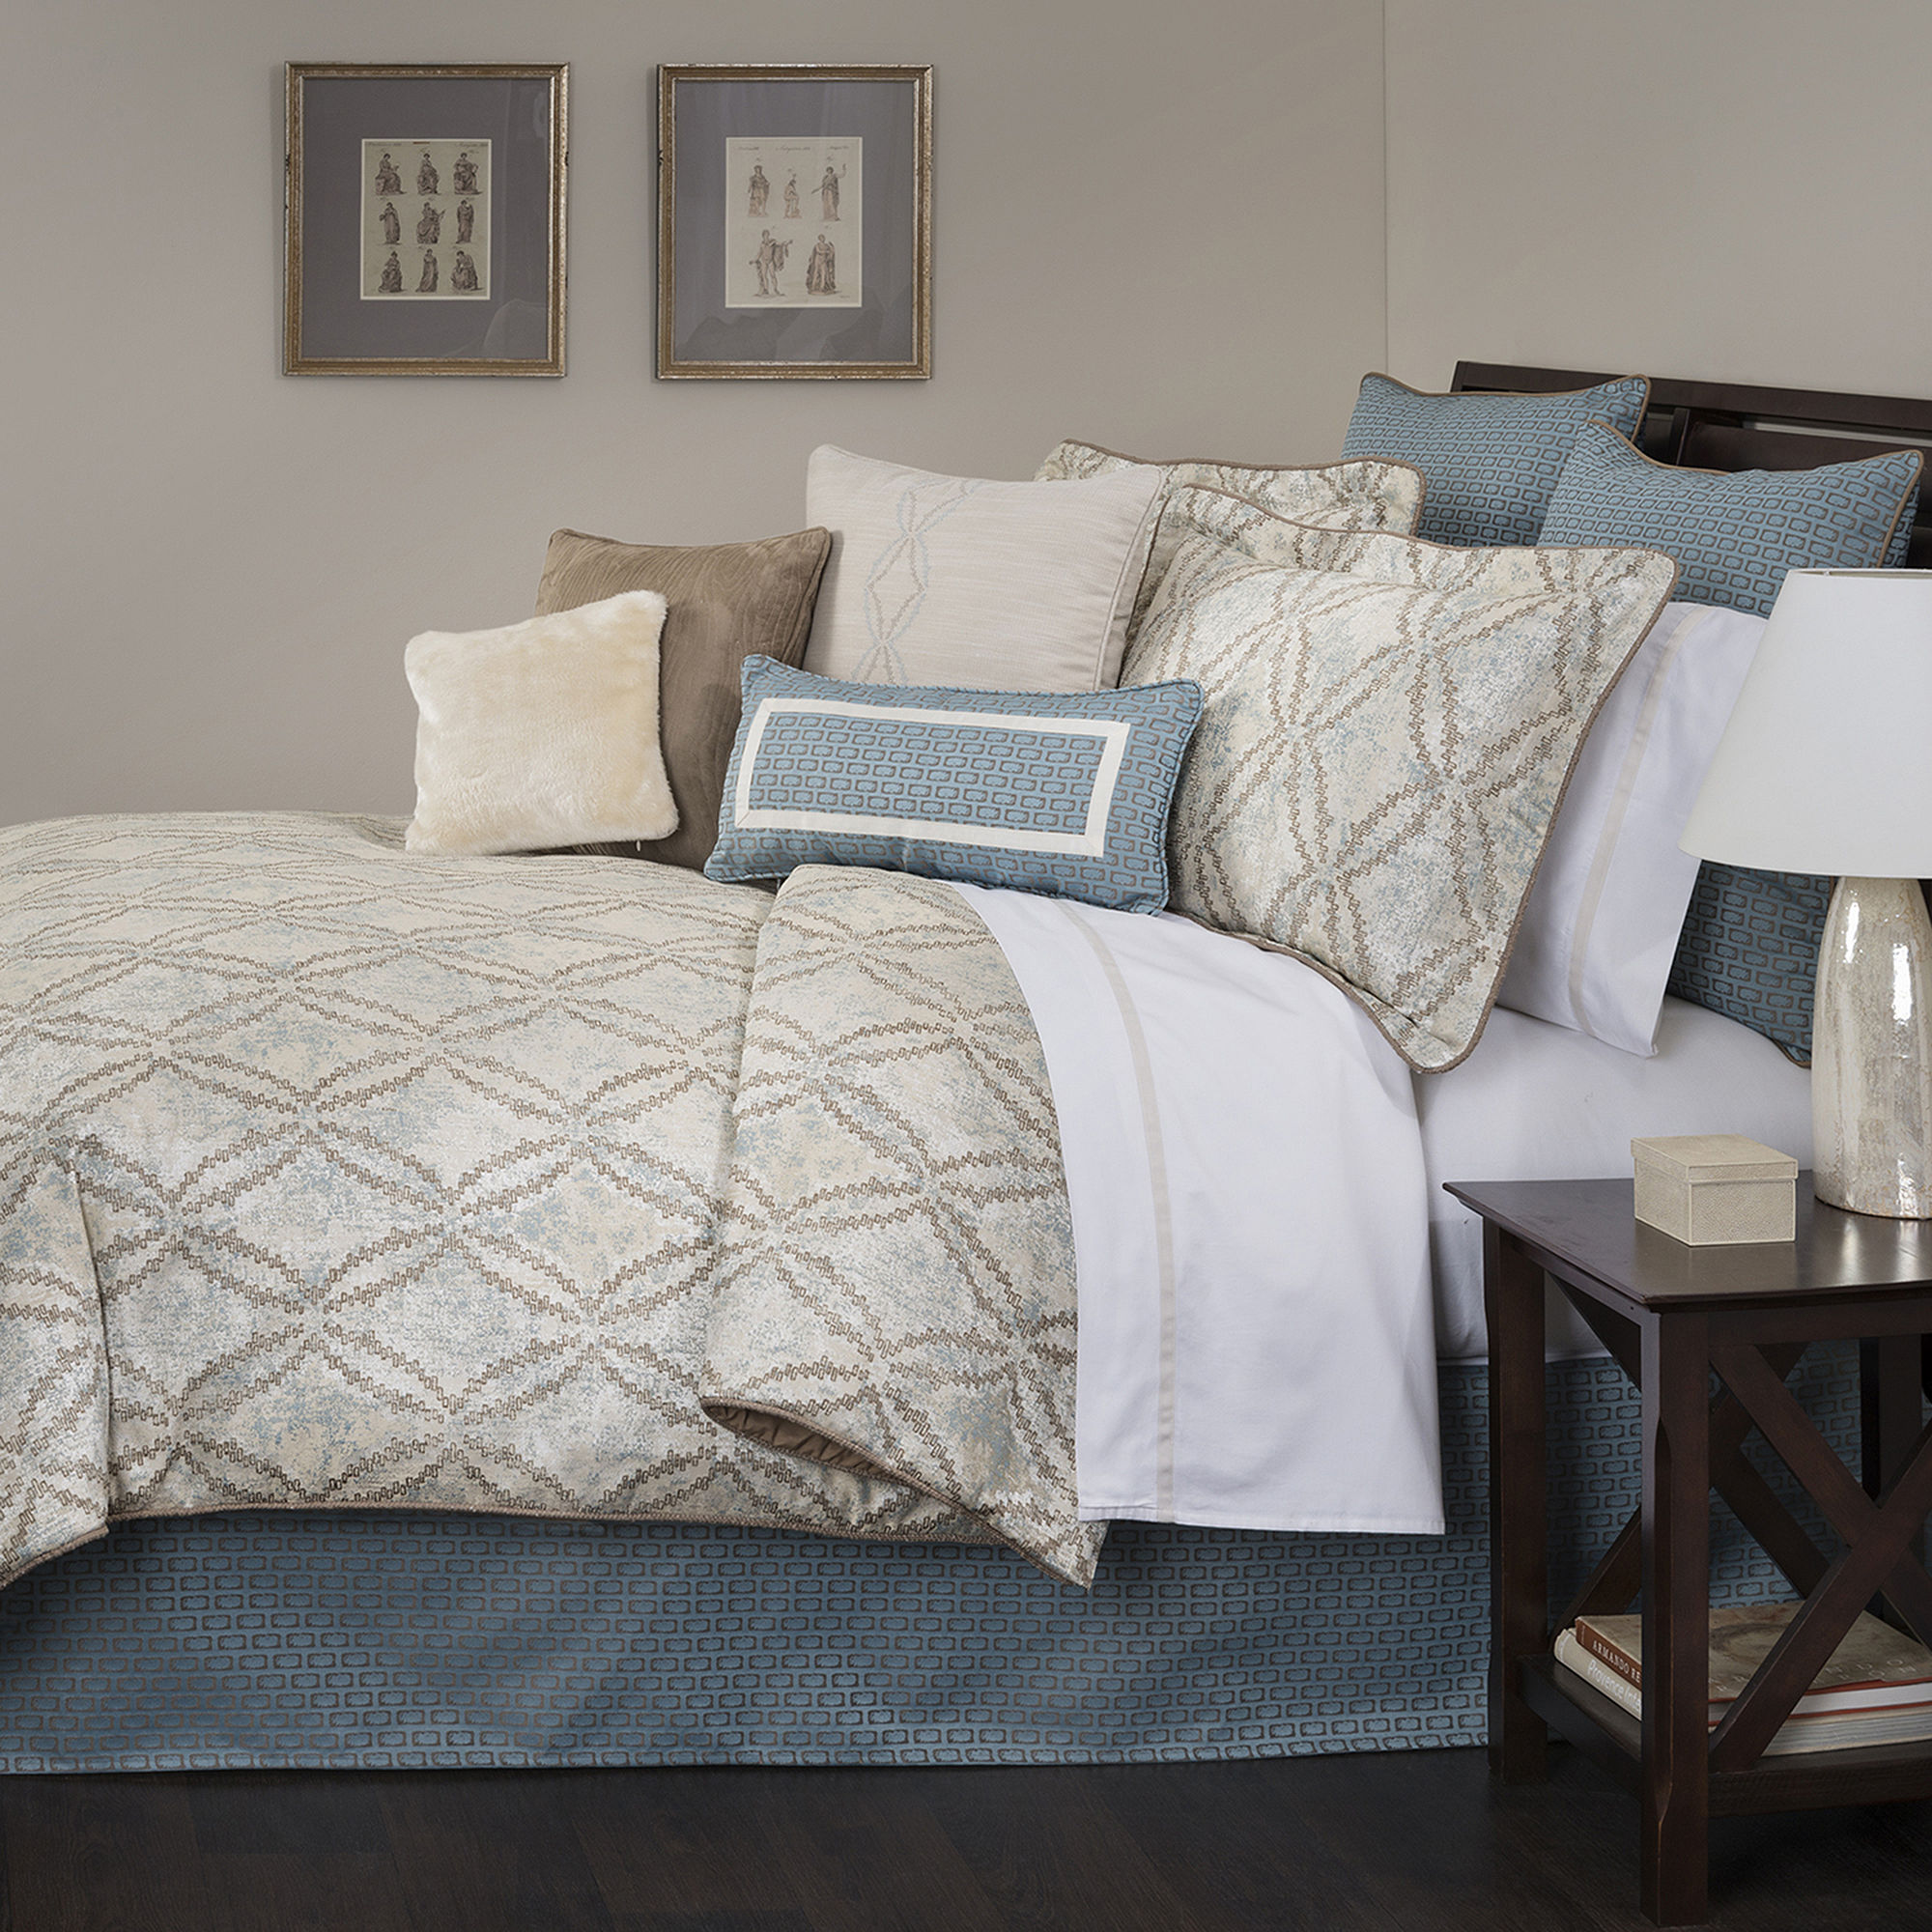 Marquis by Waterford Doral 4-pc. Comforter Set